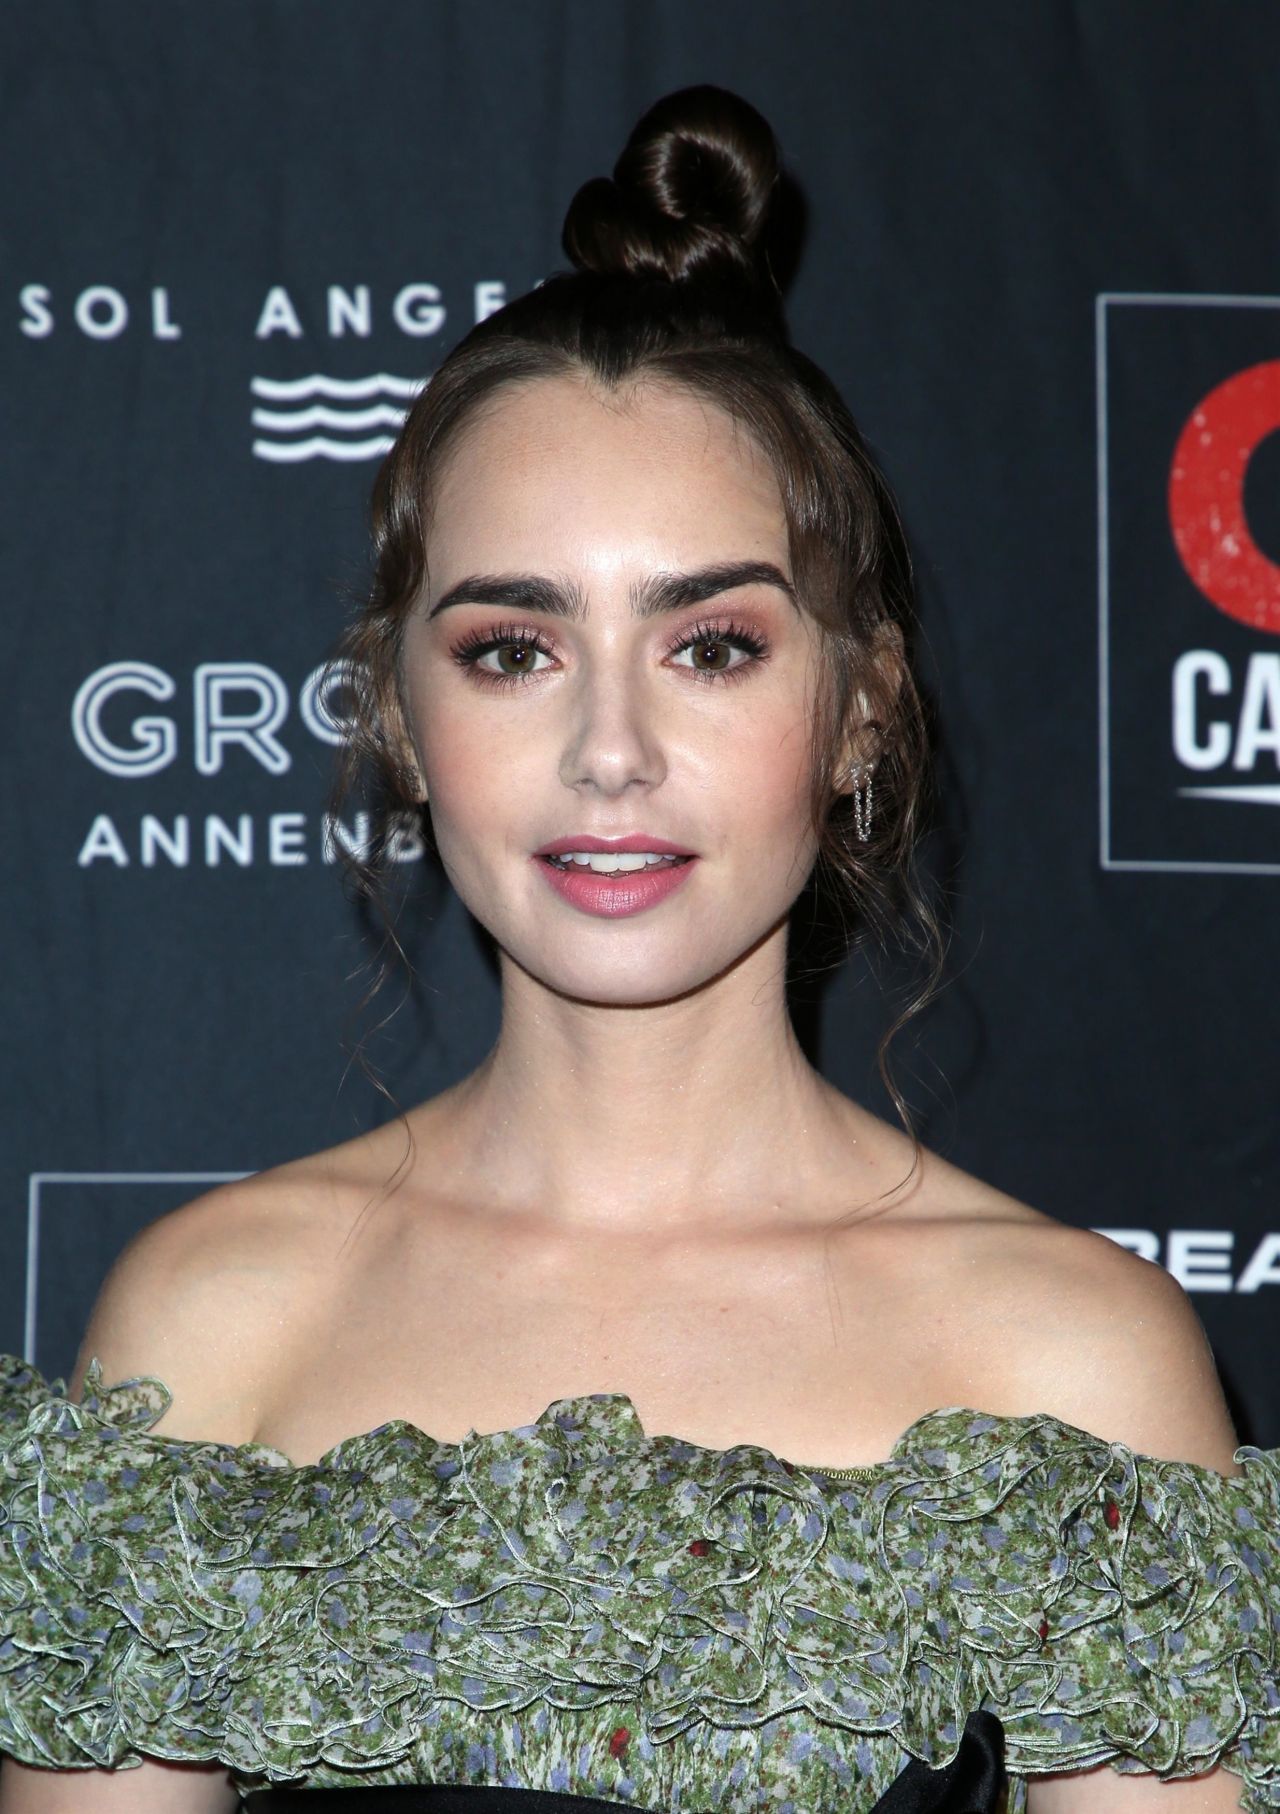 lily-collins-go-campaign-gala-in-los-angeles-10-20-2018-13.jpg